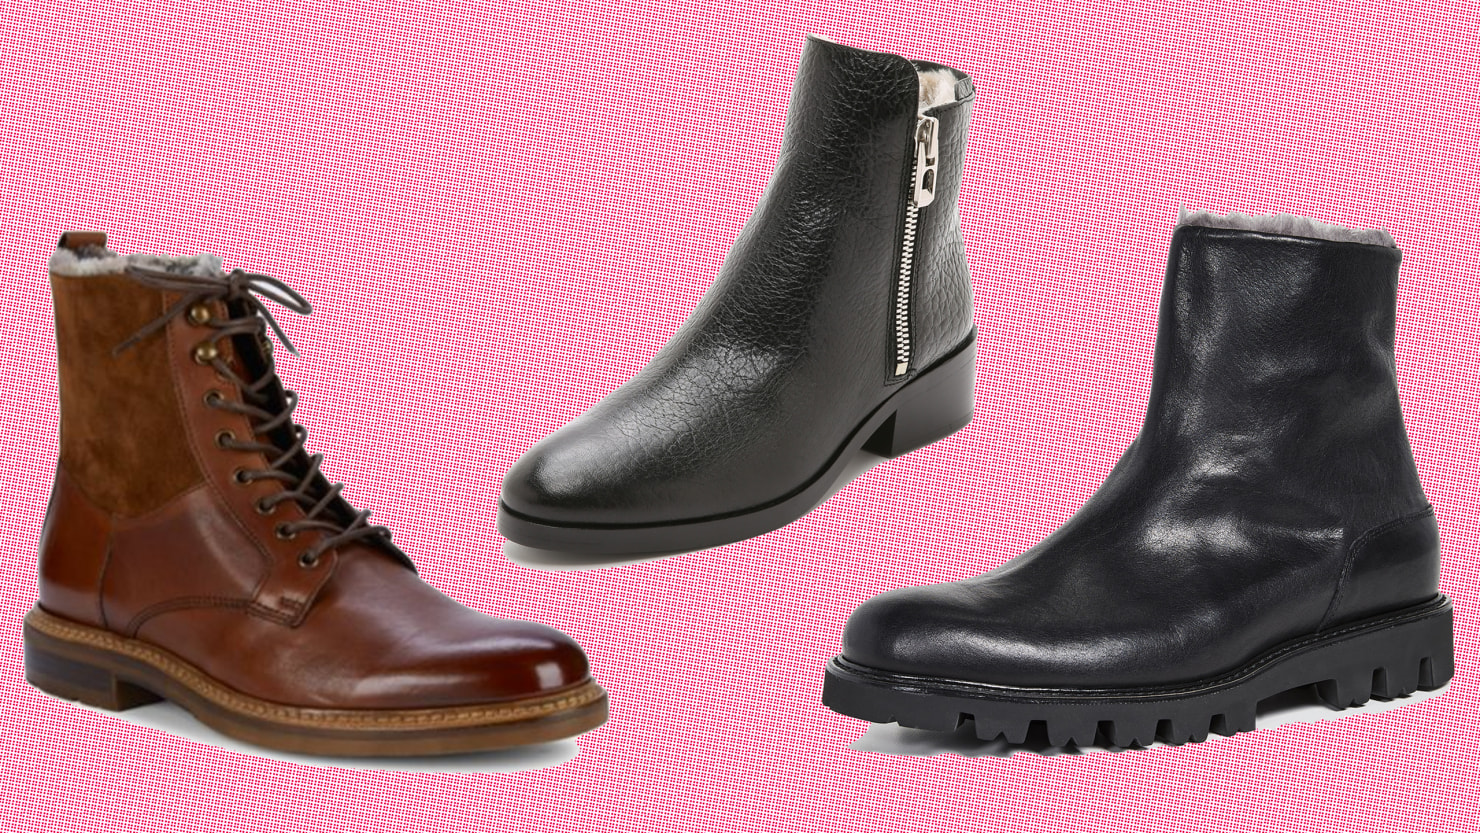 Shearling Boots That Keep Your Feet Warm, Dry, and Fashionable